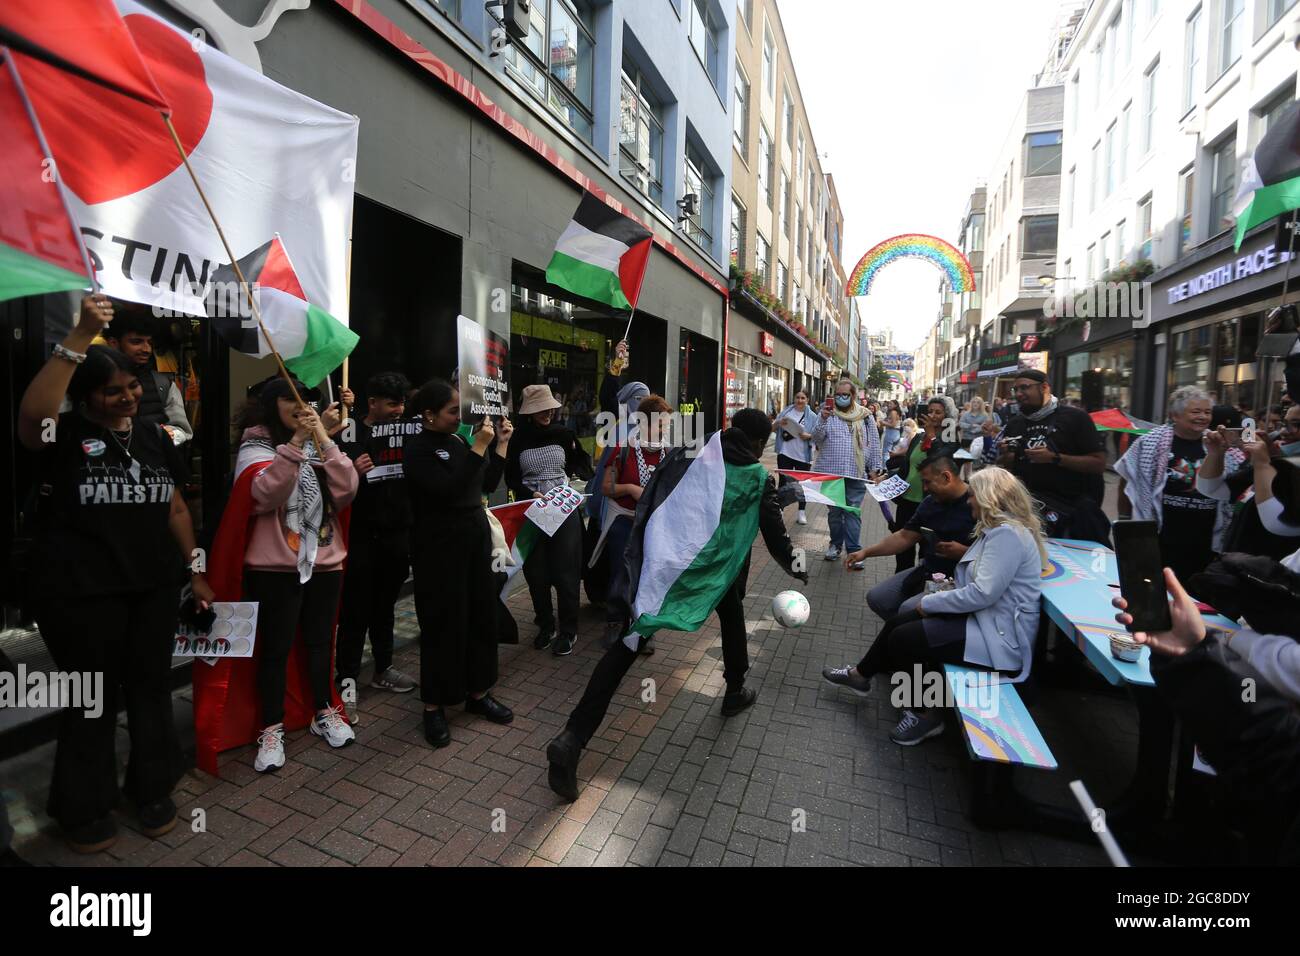 London, England, UK. 7th Aug, 2021. Protesters stage a protest outside Puma  store in Carnaby Street. Boycott, DivestmentÂ andÂ Sanction (BDS)Â against  Israel campaign activists walked through central London staging actions  outside